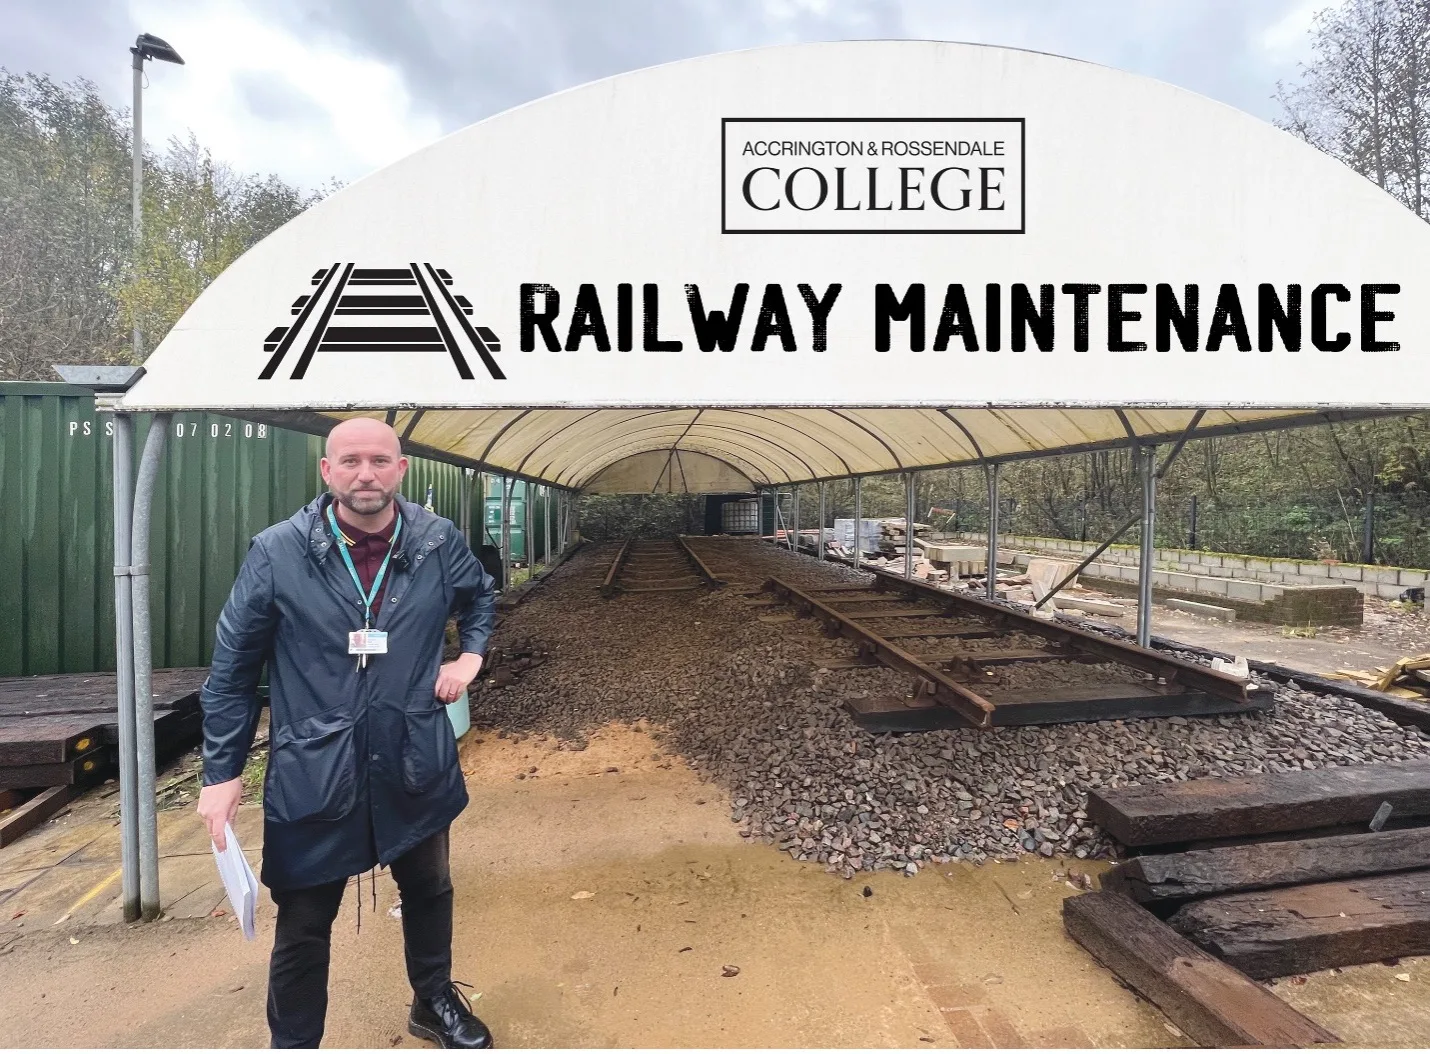 New and unique opportunity to get unemployed adults into well-paid rail careers is coming to Accrington and Rossendale College